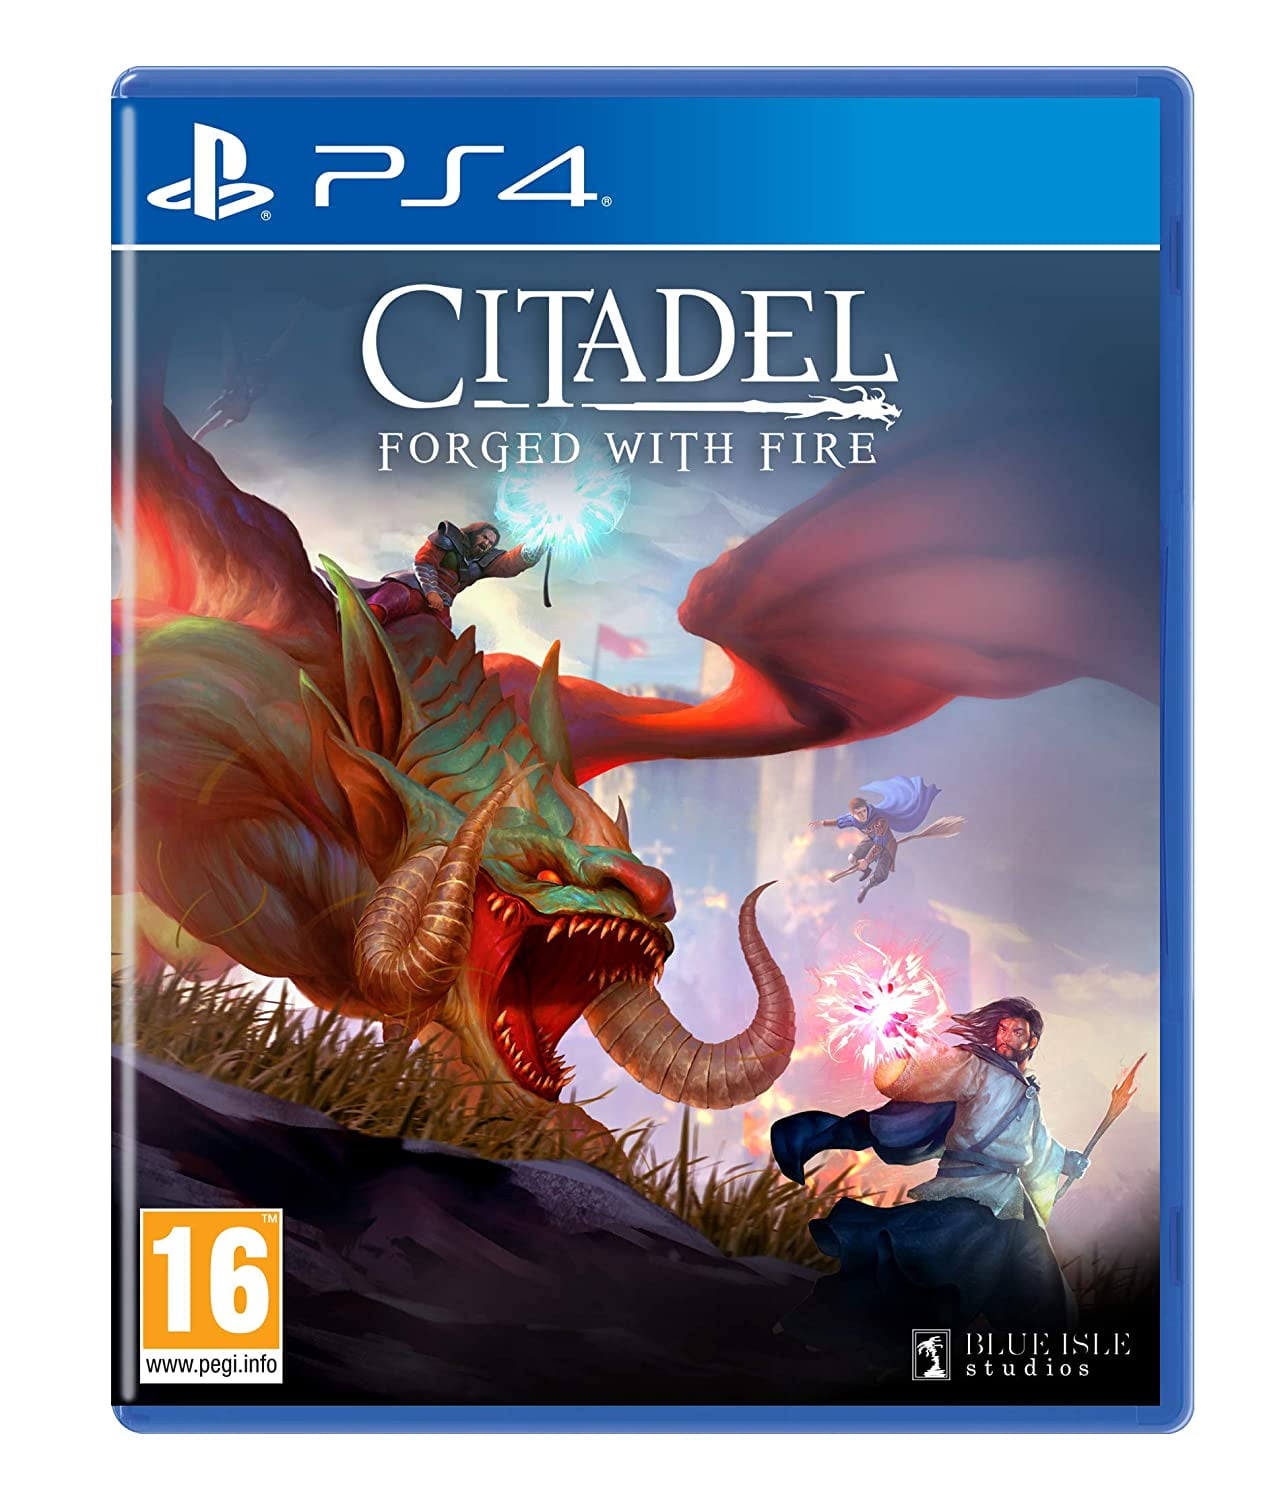 Citadel Forged with Fire (PS4 Playstation - Explore - Cast a Spell - Walmart.com